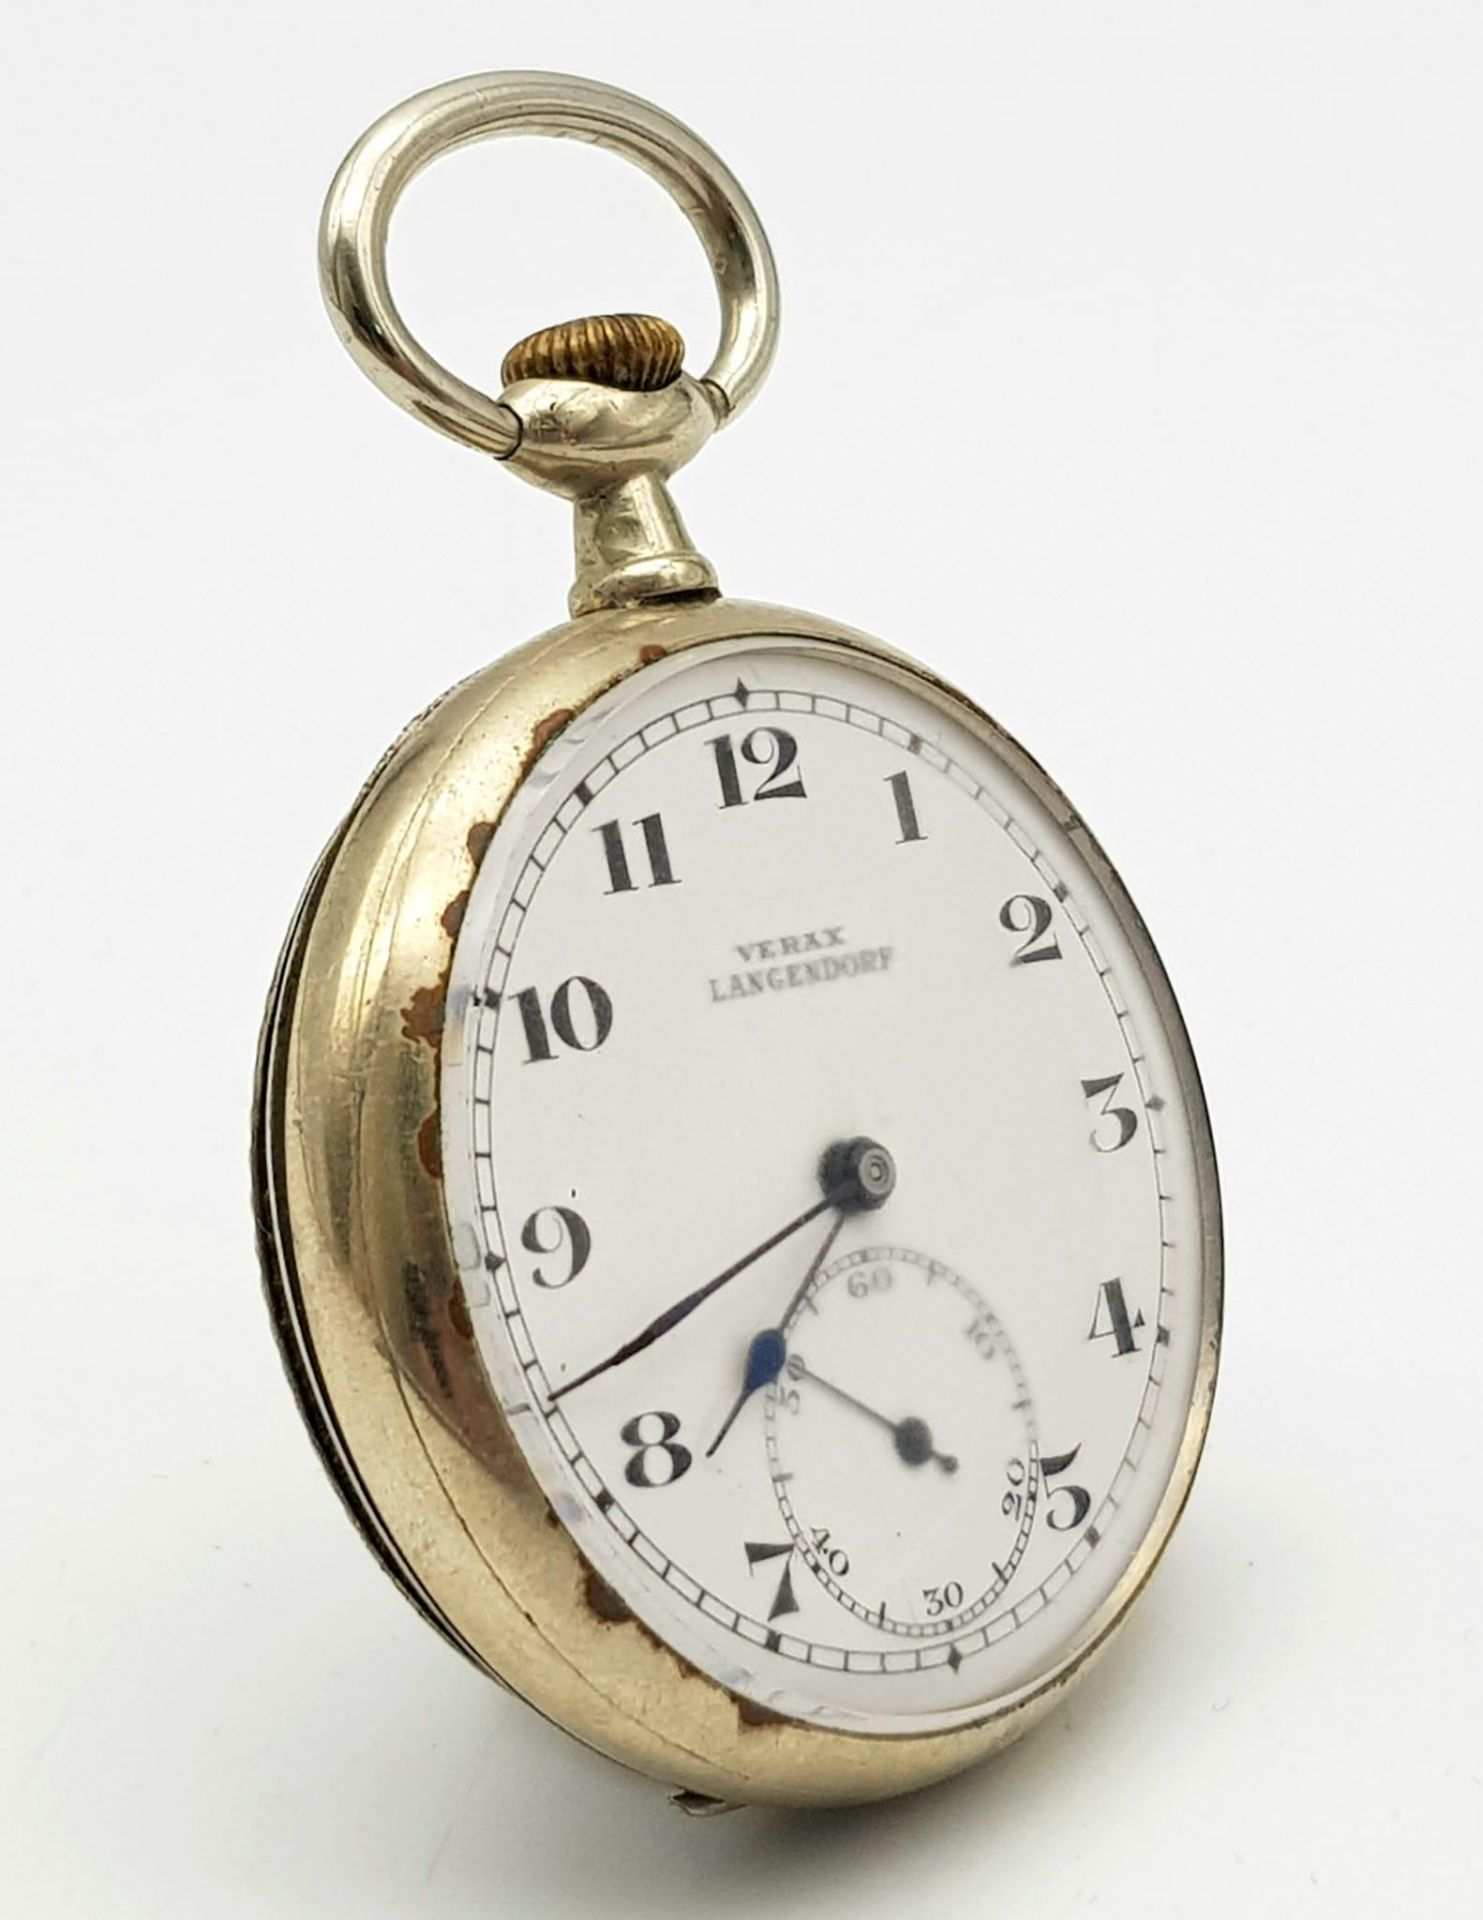 3rd Reich NSPAP pocket watch - Image 2 of 6